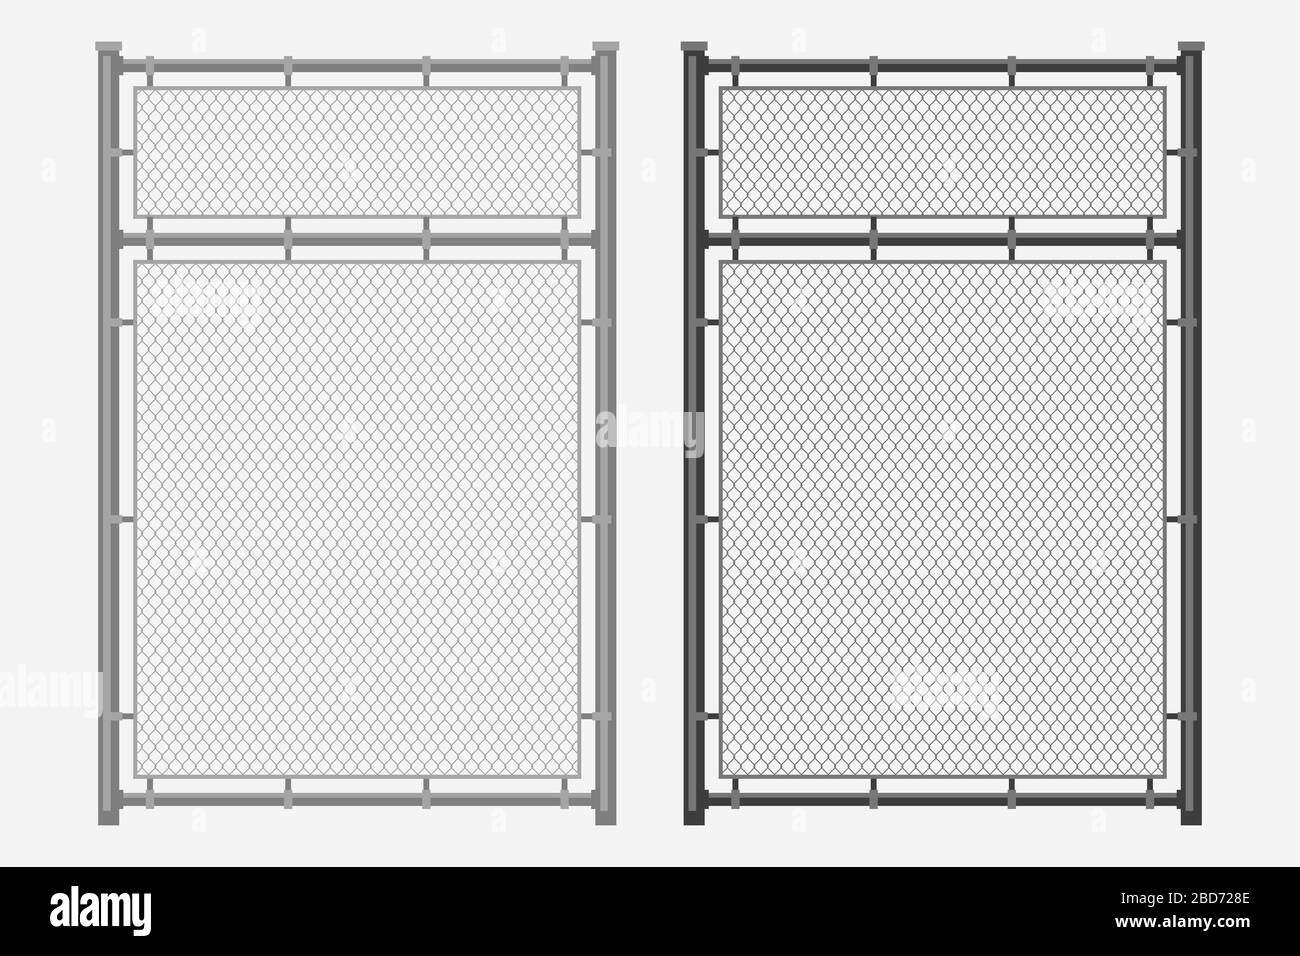 grey and black chainlink fence Stock Vector